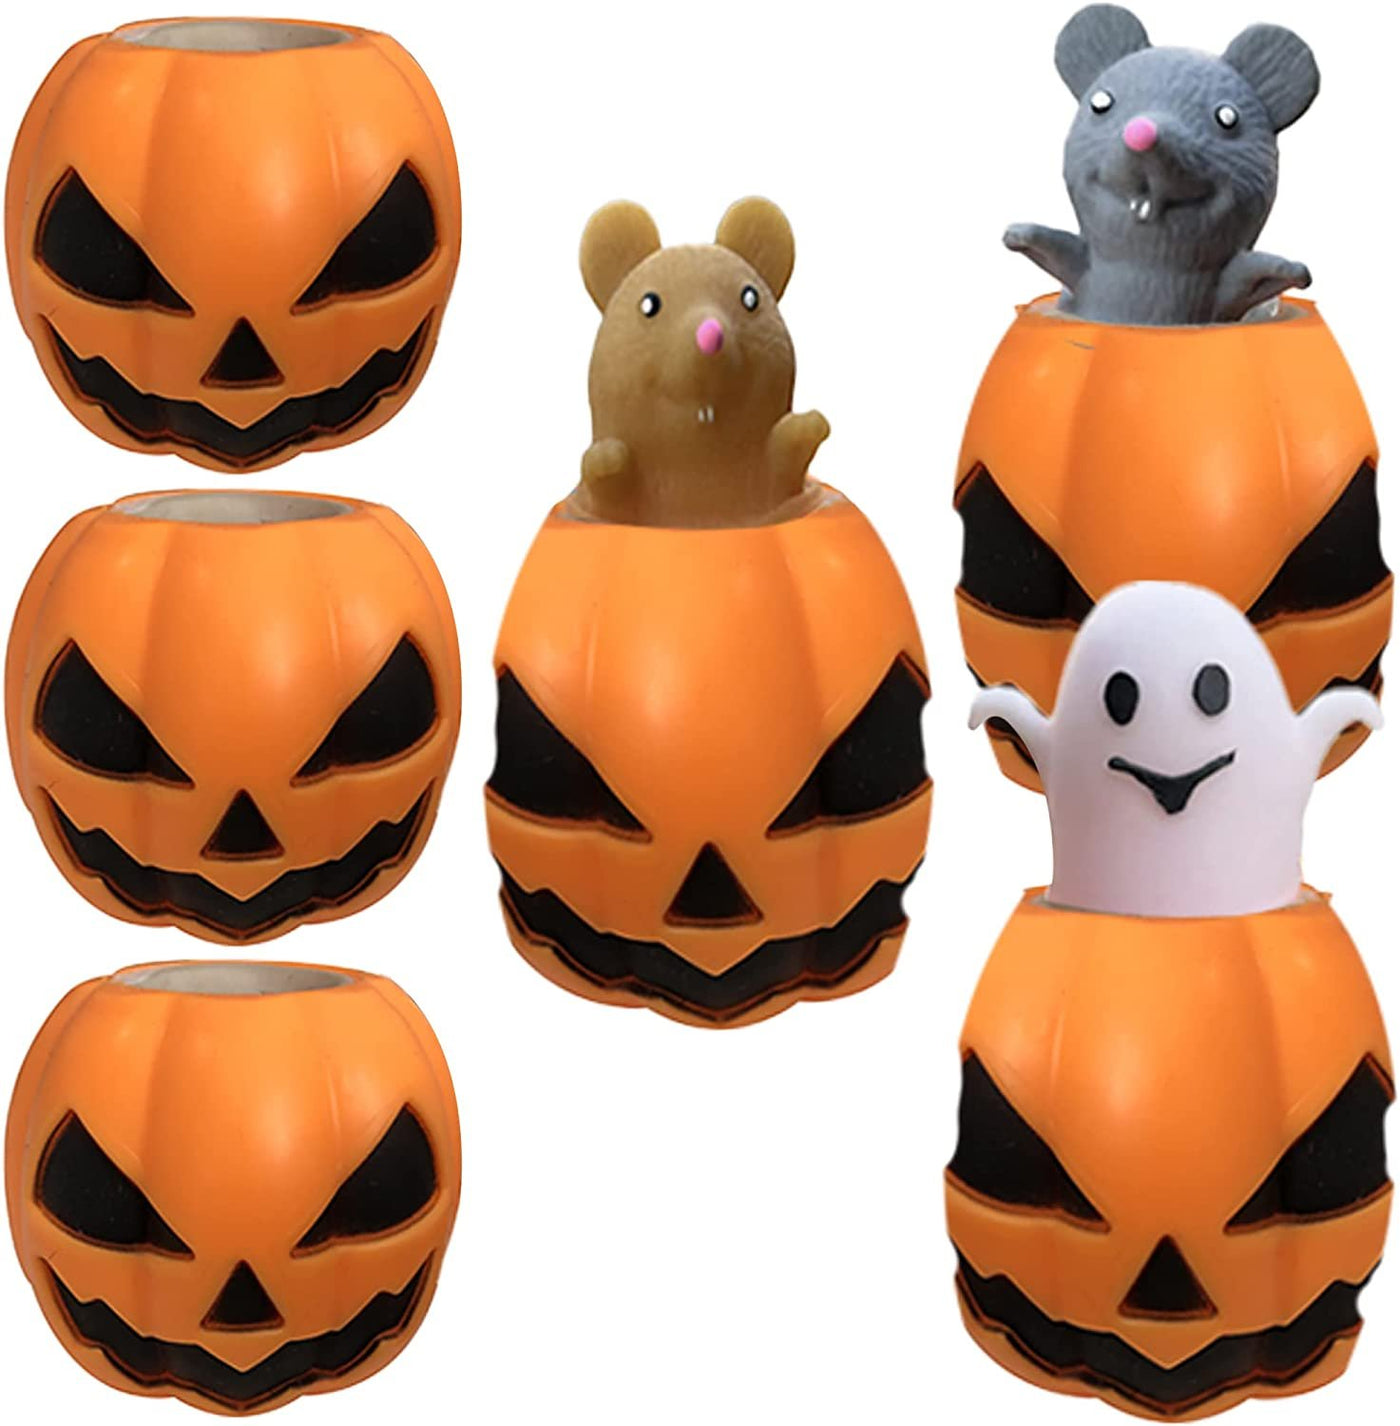 Halloween Squeeze Pop-Out Toys, Set of 6, Halloween Stress Relief Toys for Kids with Pop-Out Characters, Great as Non-Candy Halloween Treats, Trick or Treat Supplies, and Prank Toys